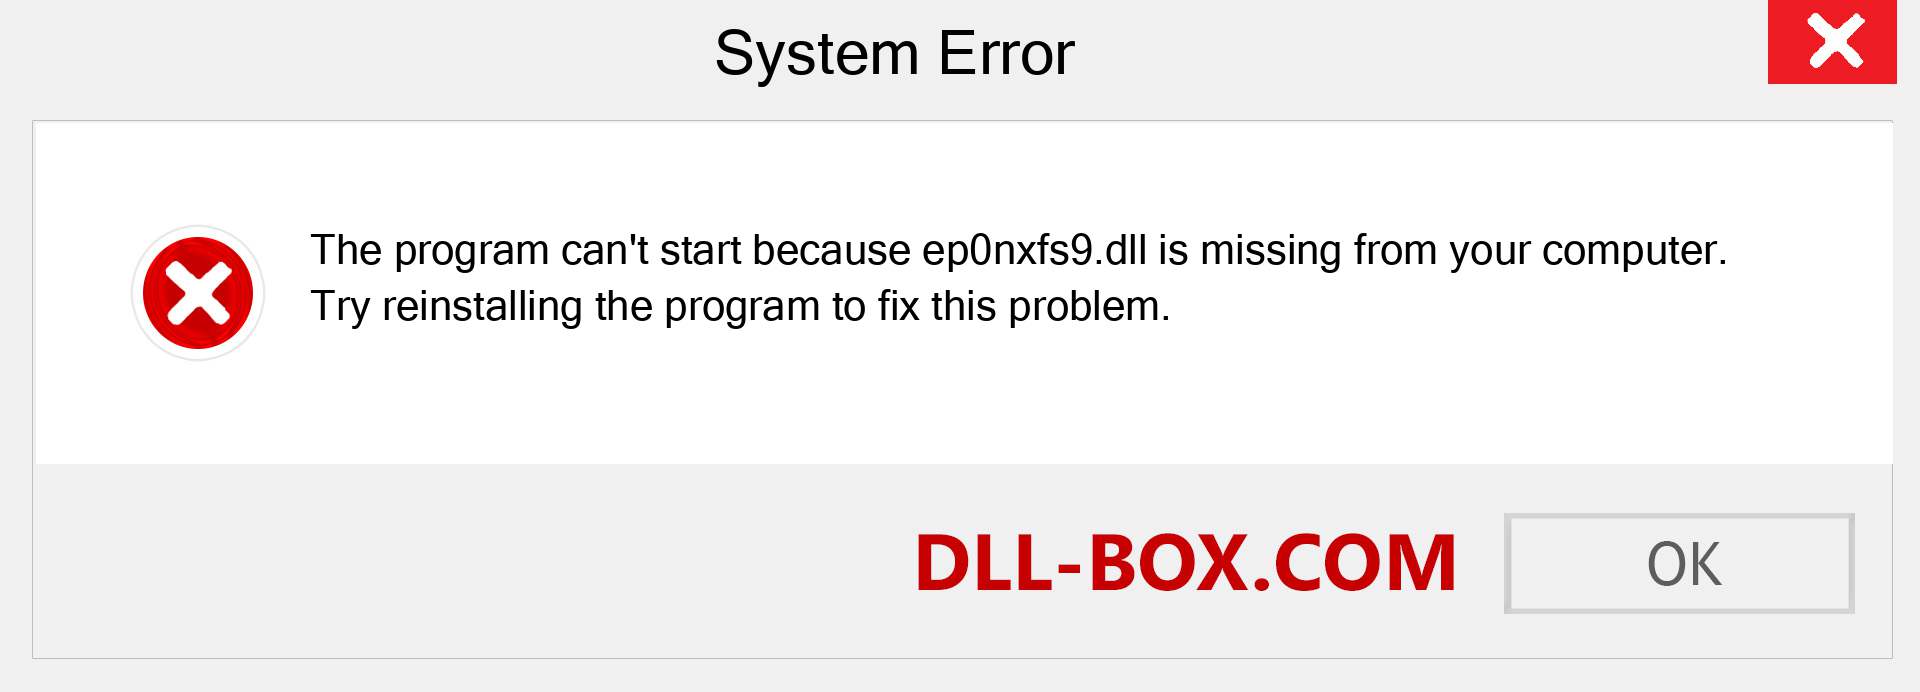  ep0nxfs9.dll file is missing?. Download for Windows 7, 8, 10 - Fix  ep0nxfs9 dll Missing Error on Windows, photos, images